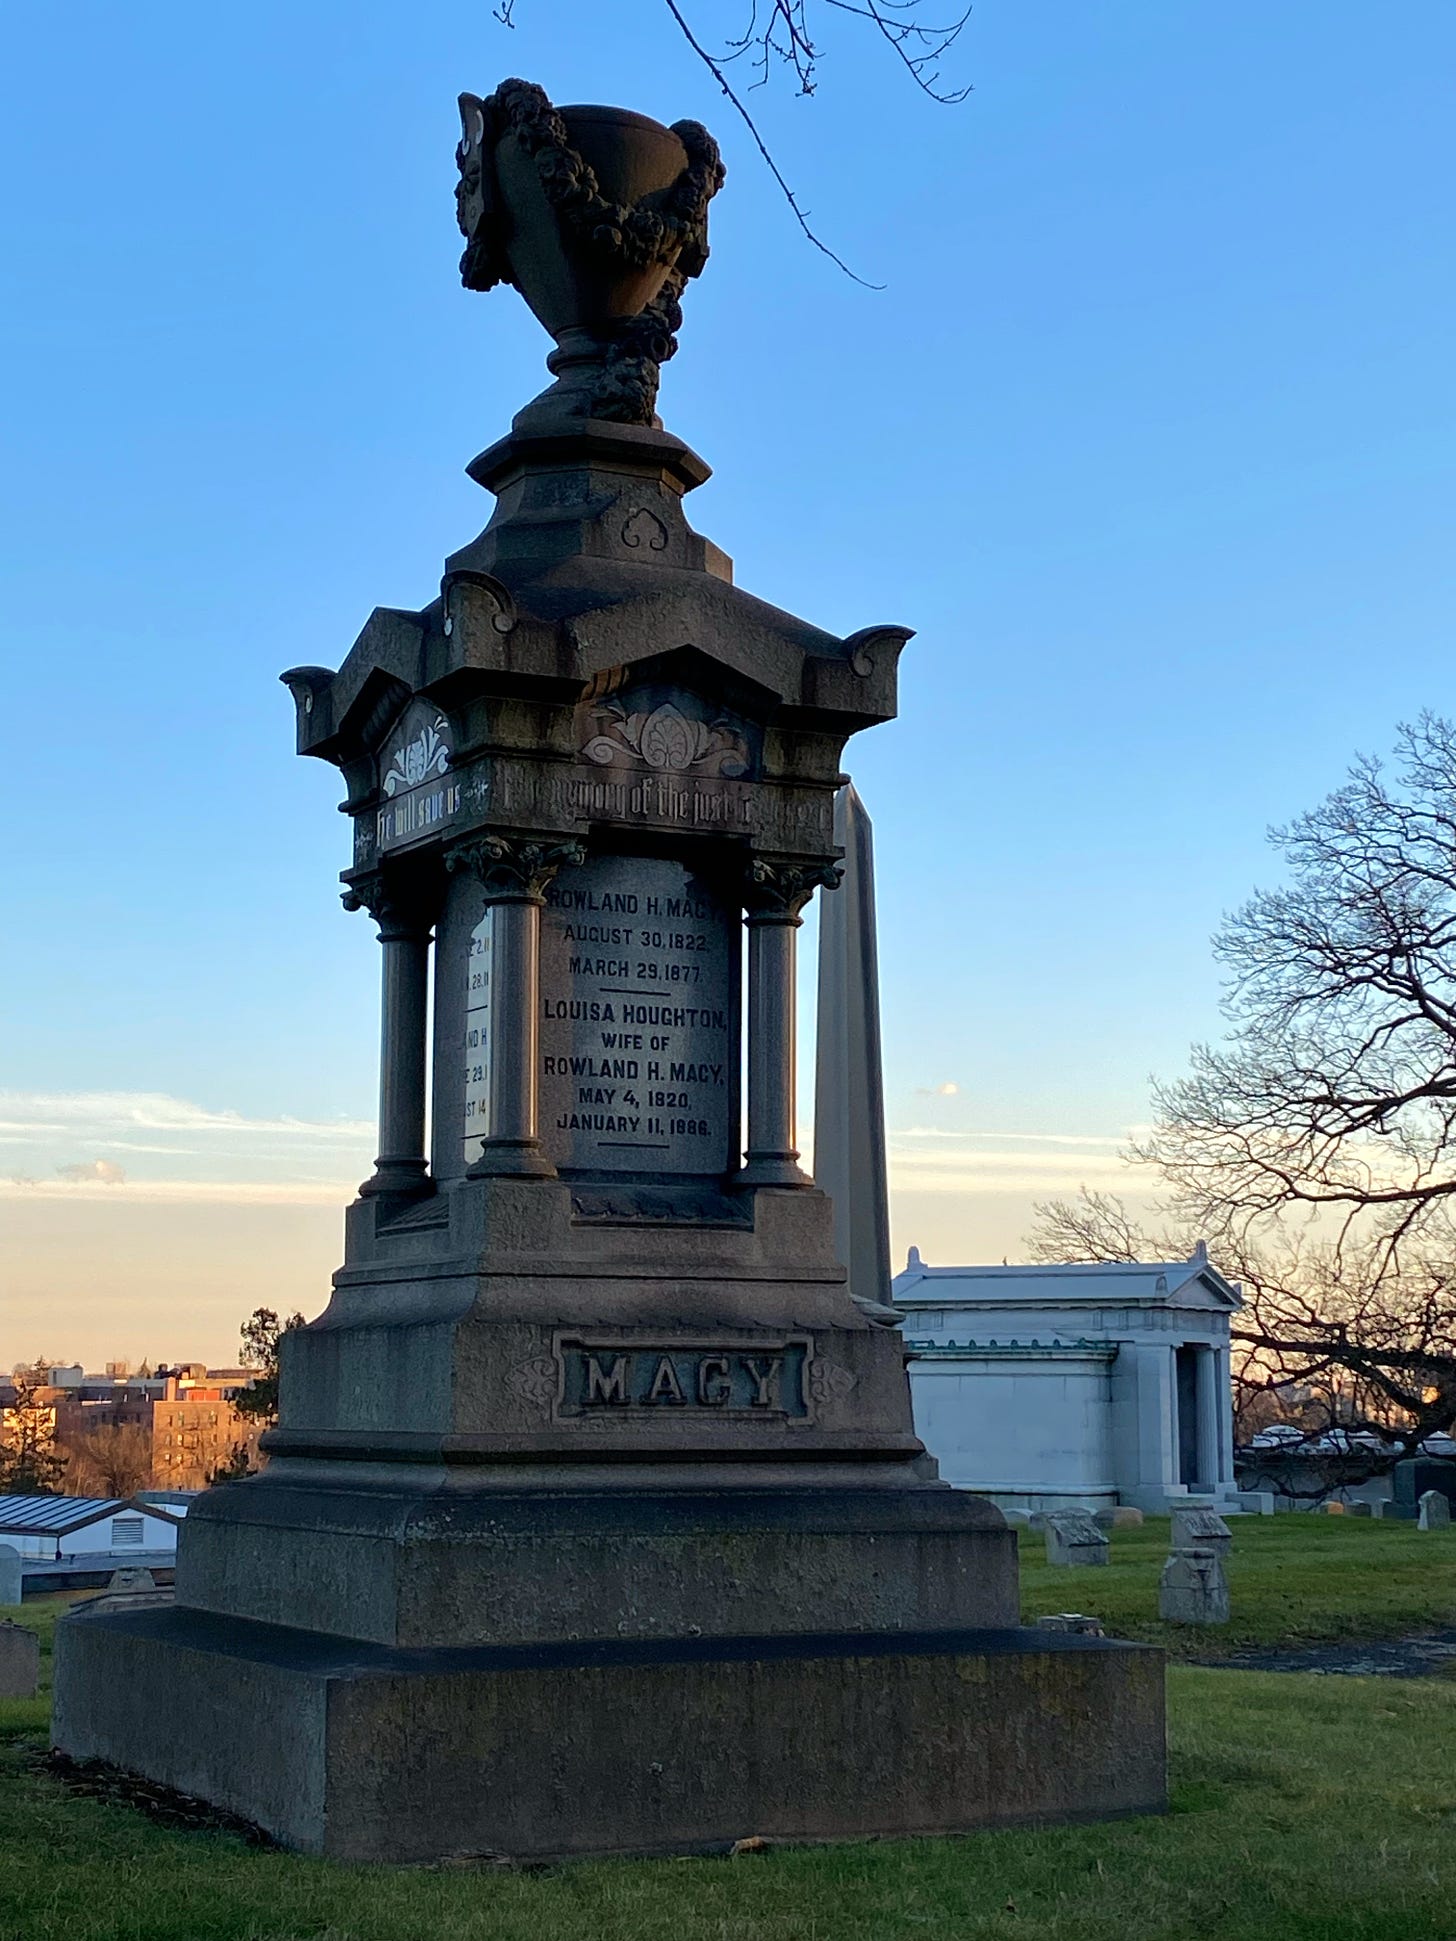 The Macy monument at Woodlawn as the sun begins to set.